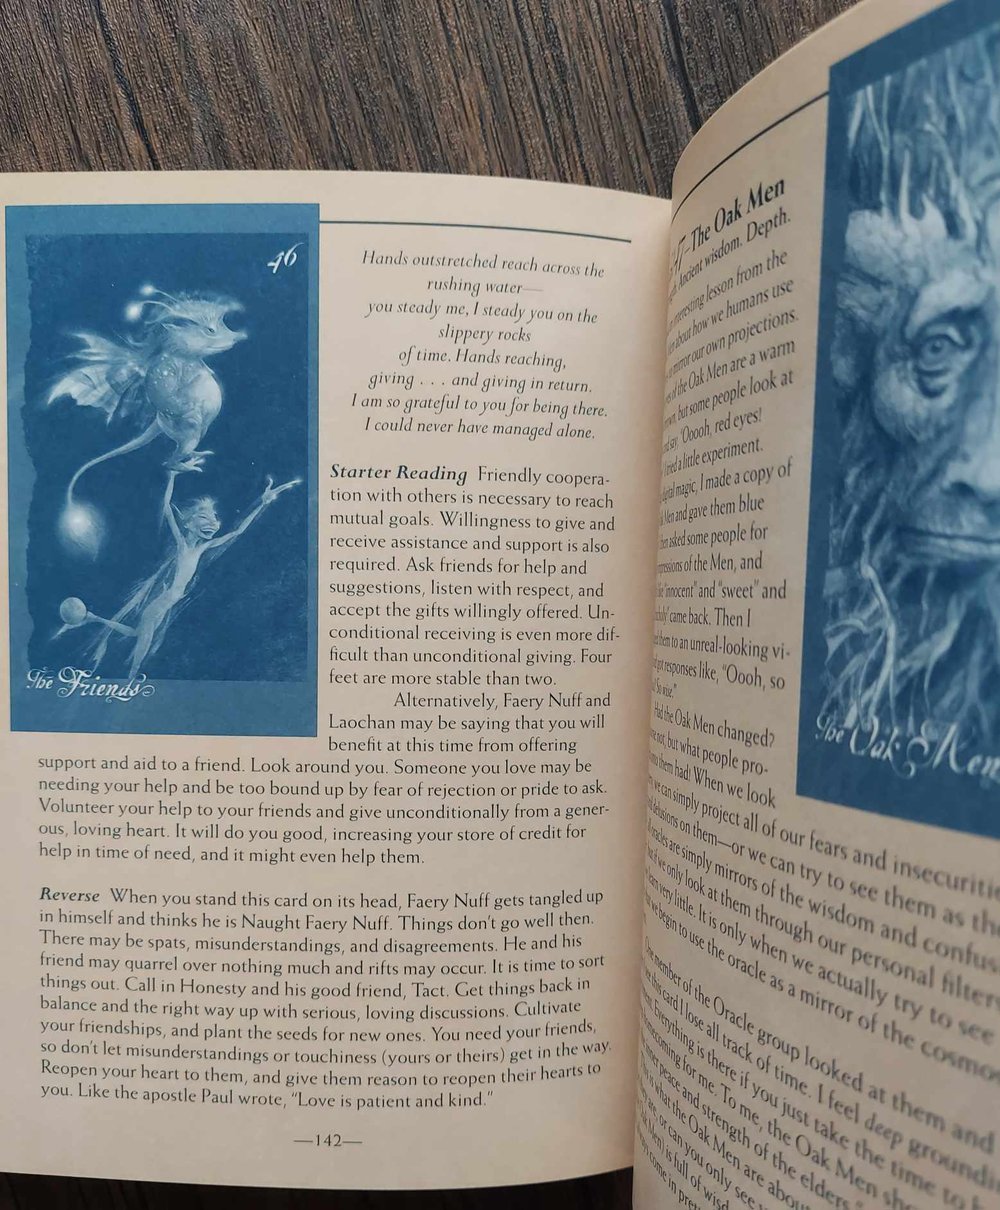 The Faeries' Oracle, by Brian Froud - SIGNED with SKETCH